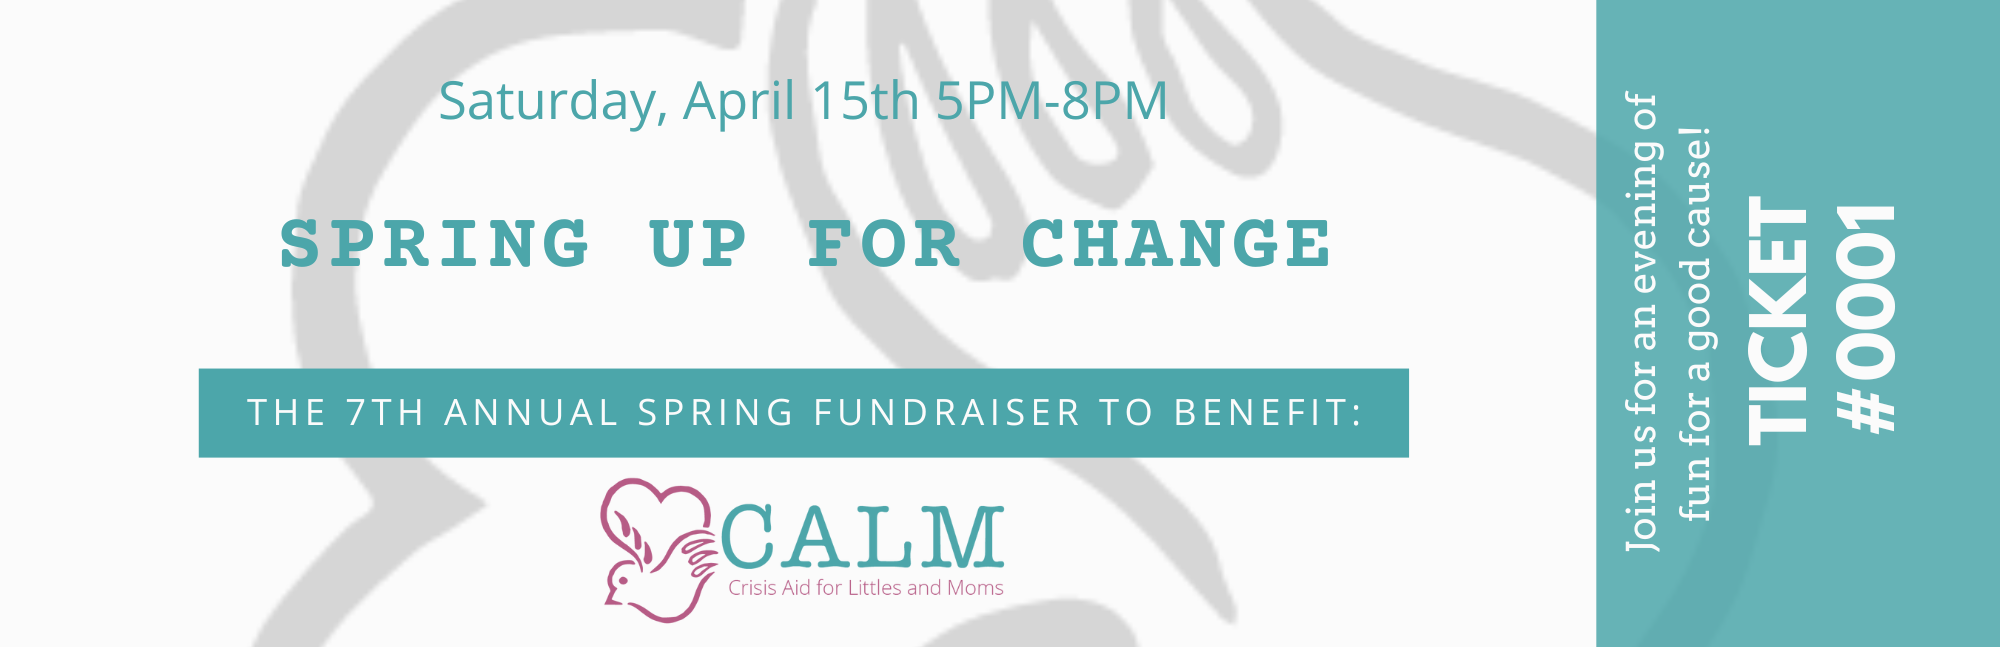 7th Annual Spring Fundraiser Dinner to benefit CALM